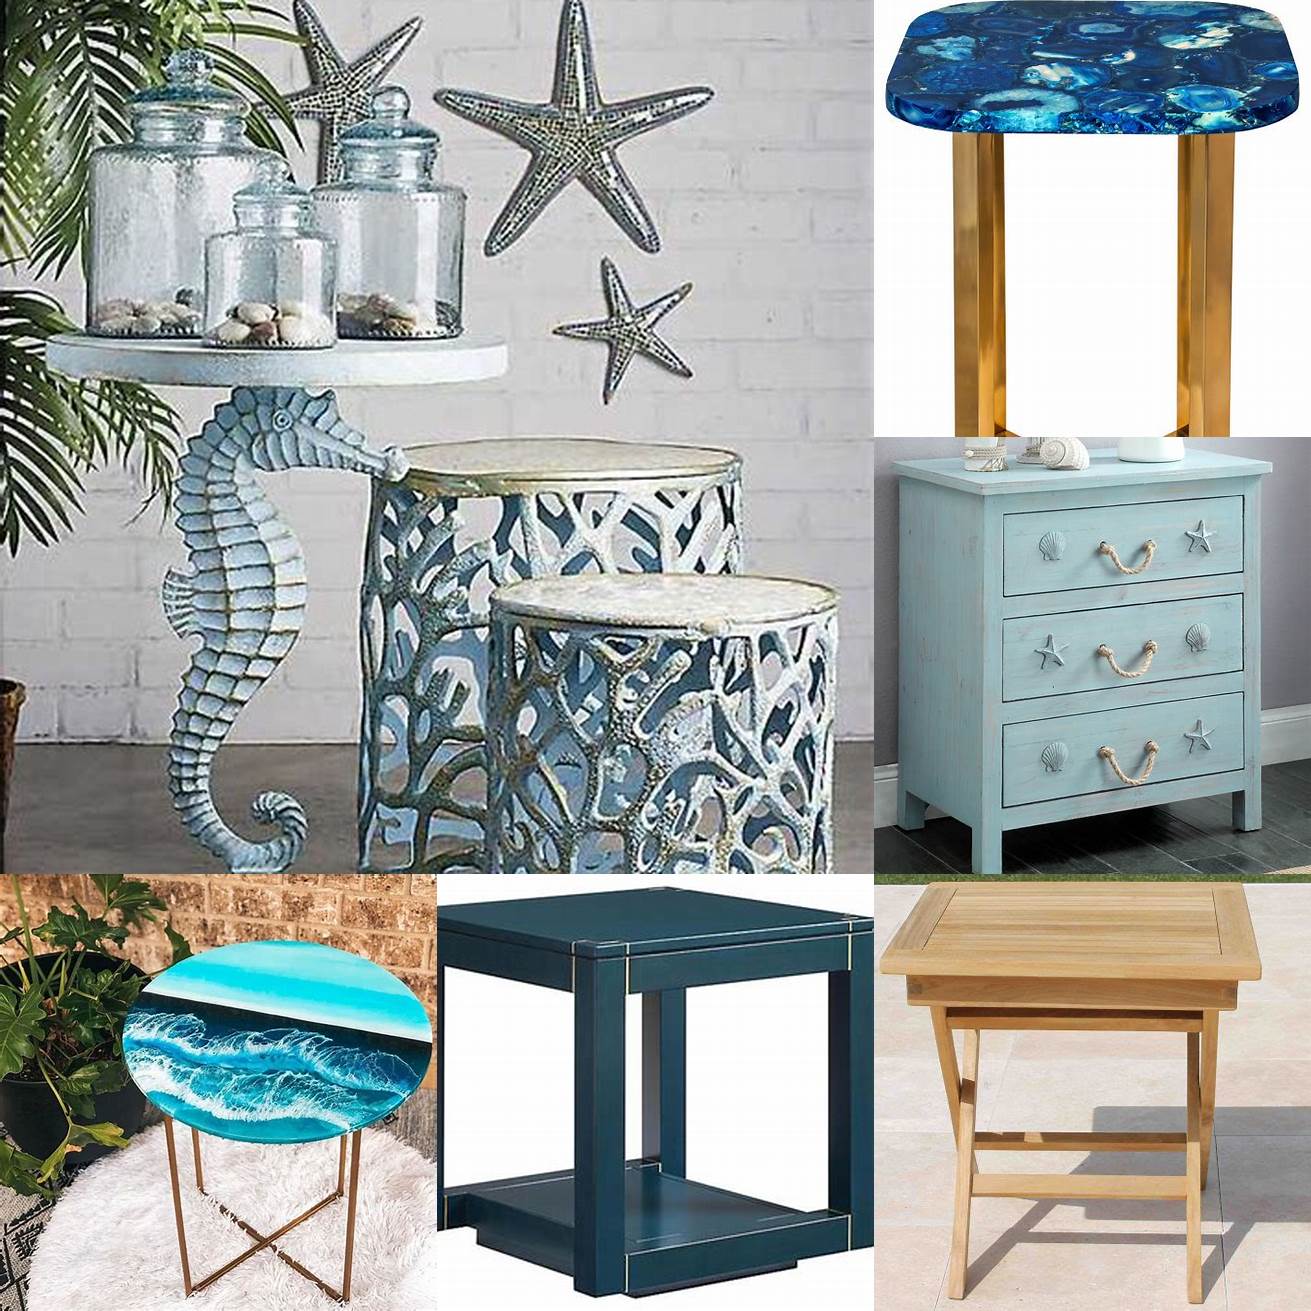 The Oceanic Side Table